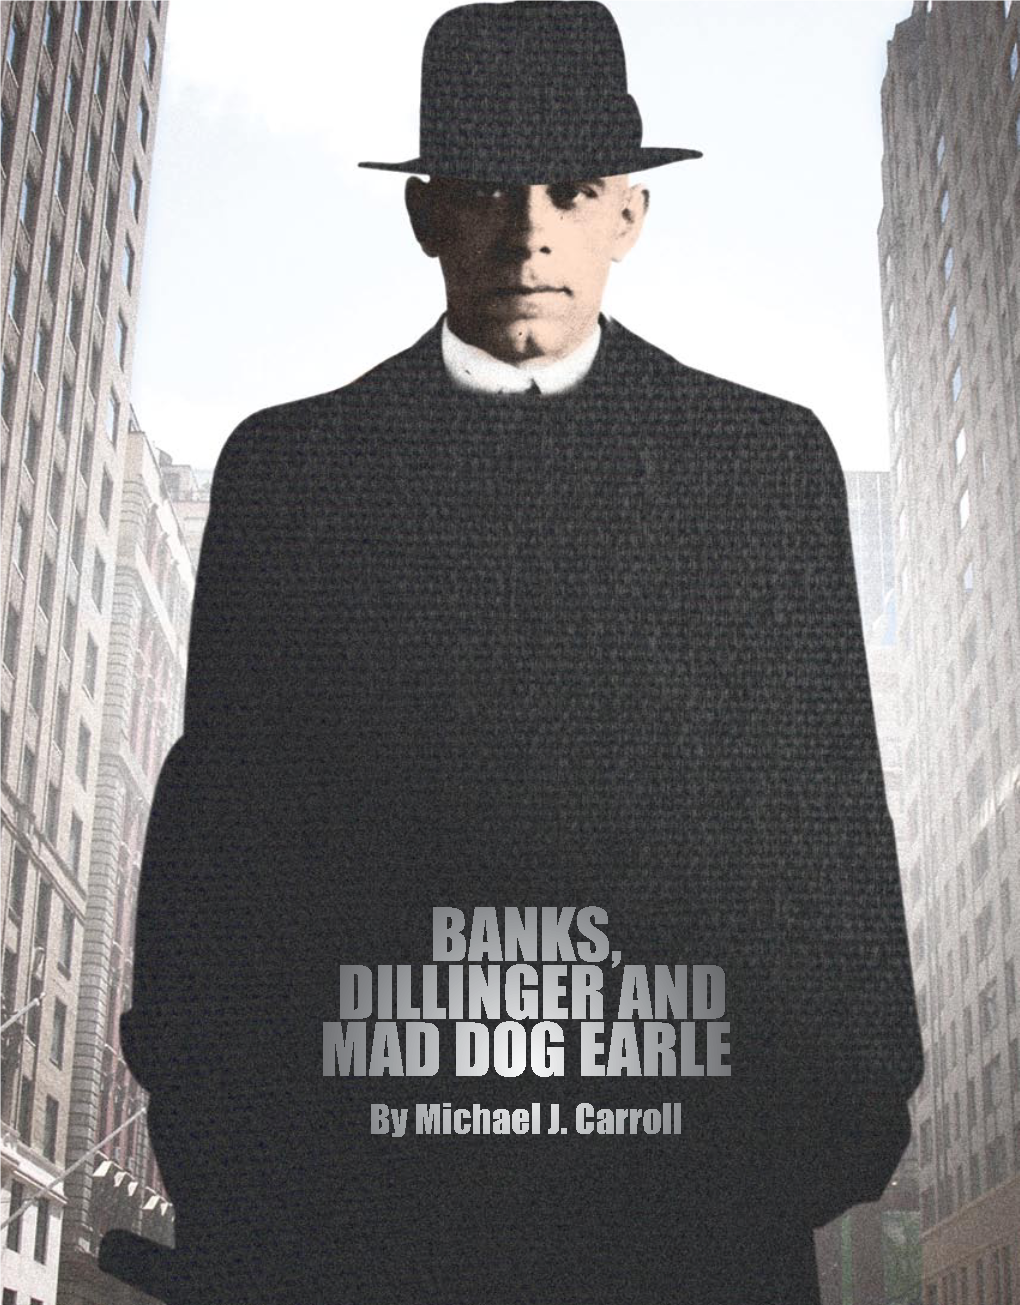 BANKS, DILLINGER and MAD DOG EARLE by Michael J